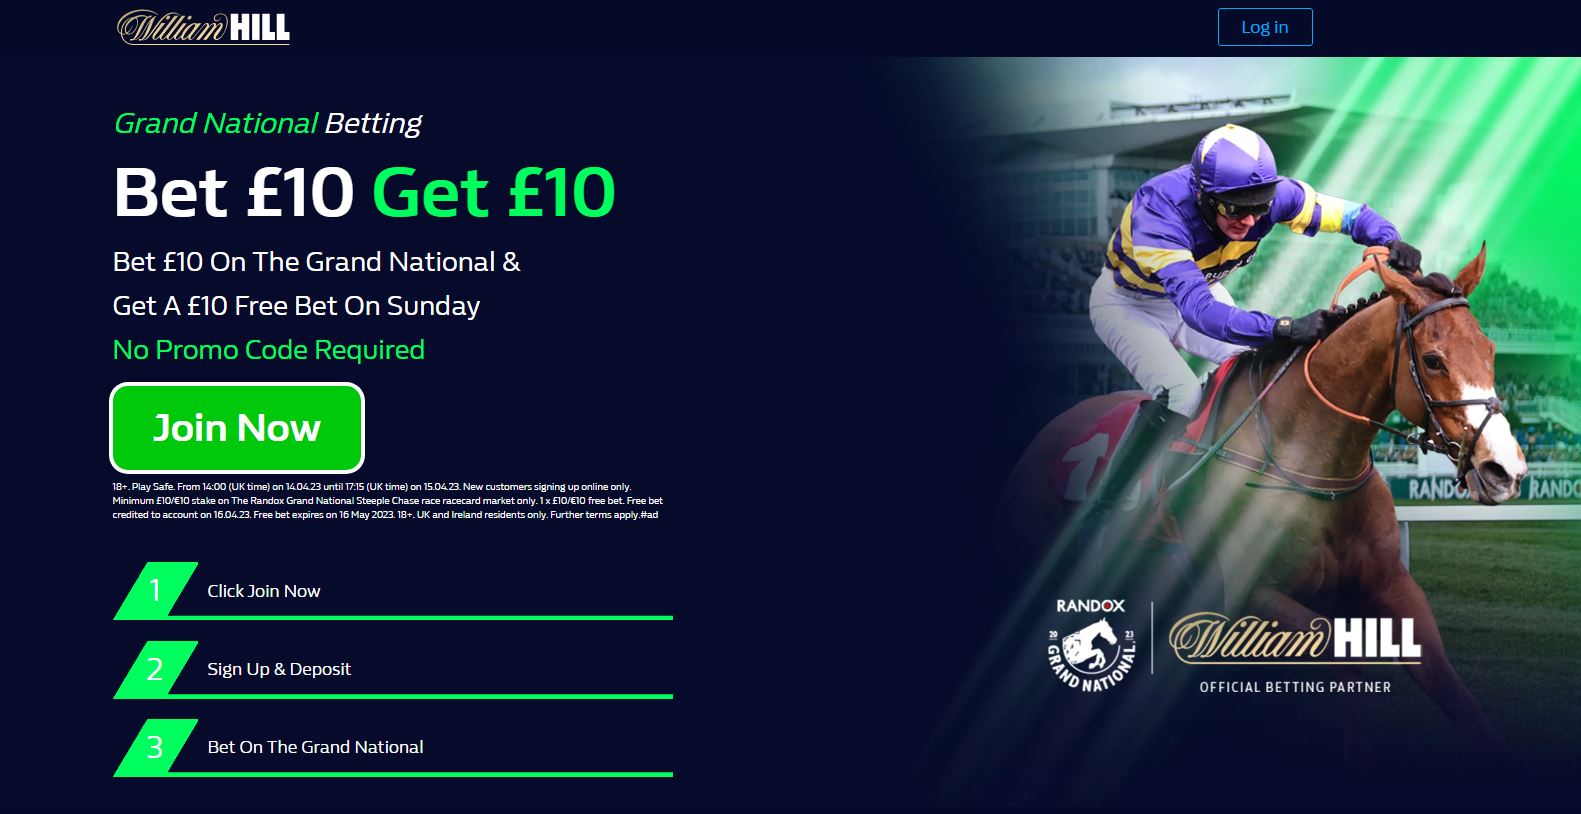 William Hill Grand National offer